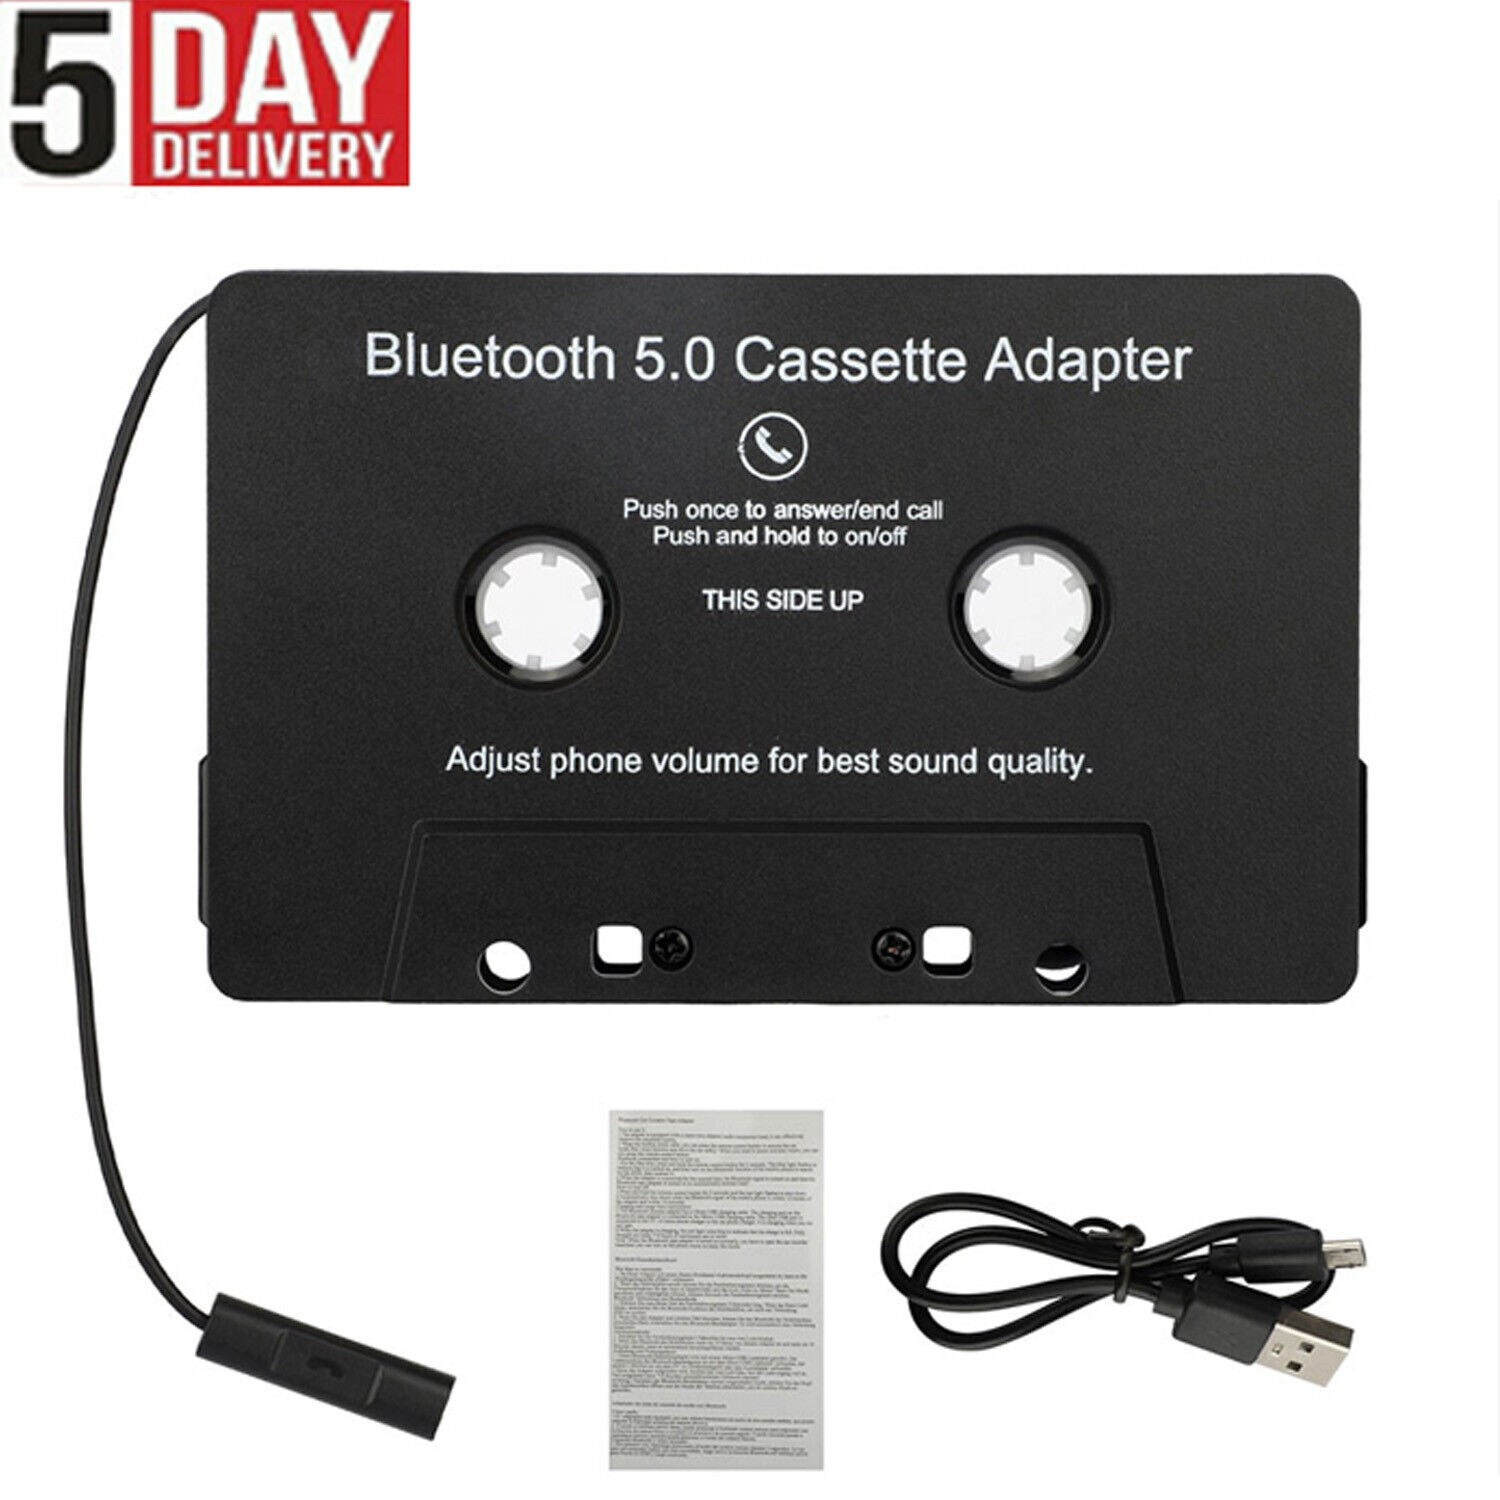 Bluetooth 5.0 Car Audio Stereo Cassette Tape Adapter To Aux for iphone Samsung